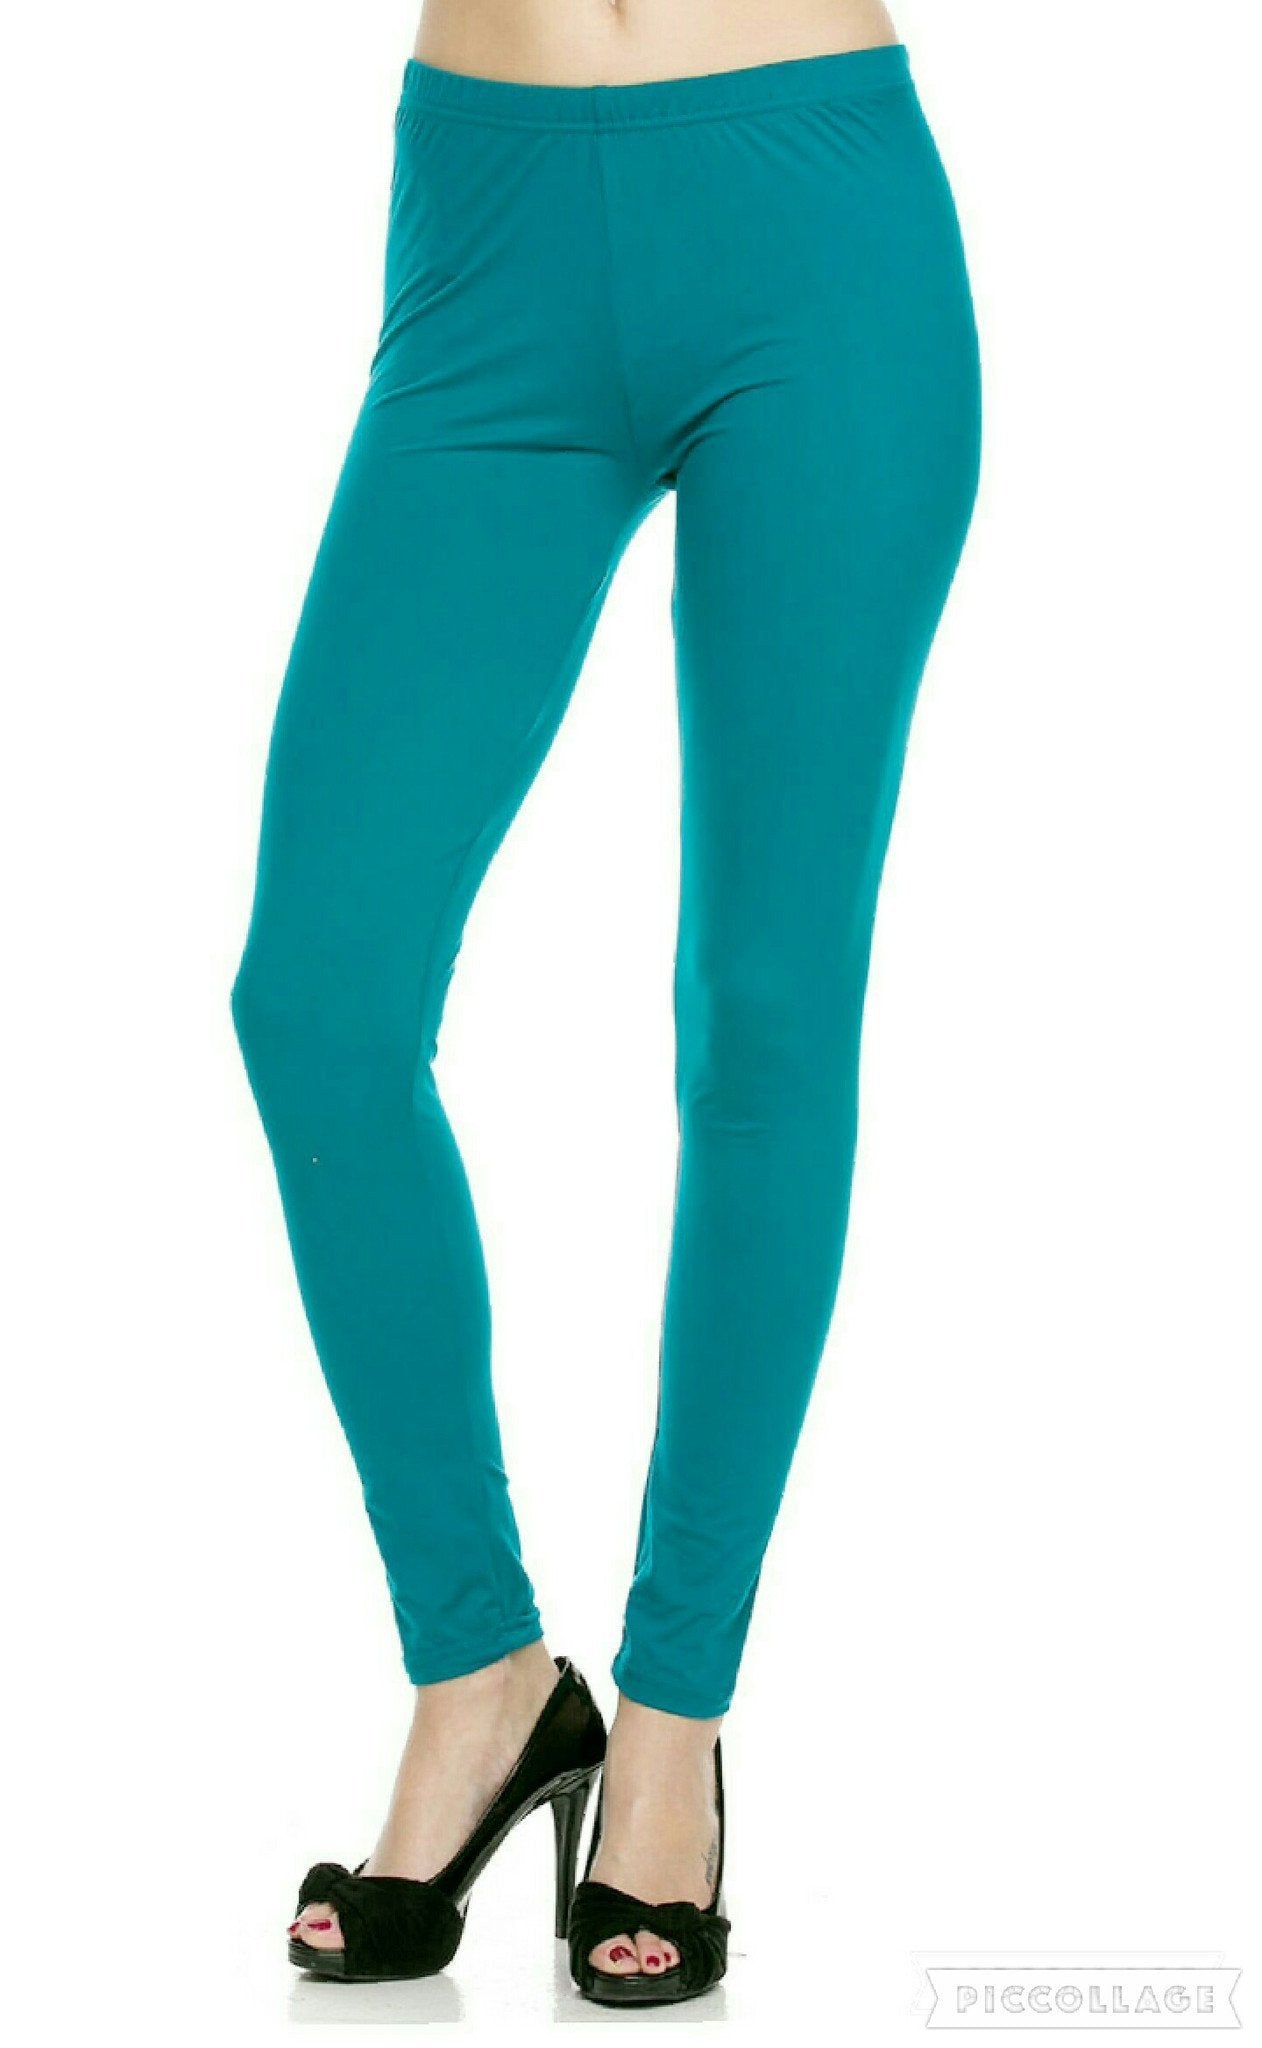 Solid Turquoise Leggings - Twisted Spur Boutique OUTLET